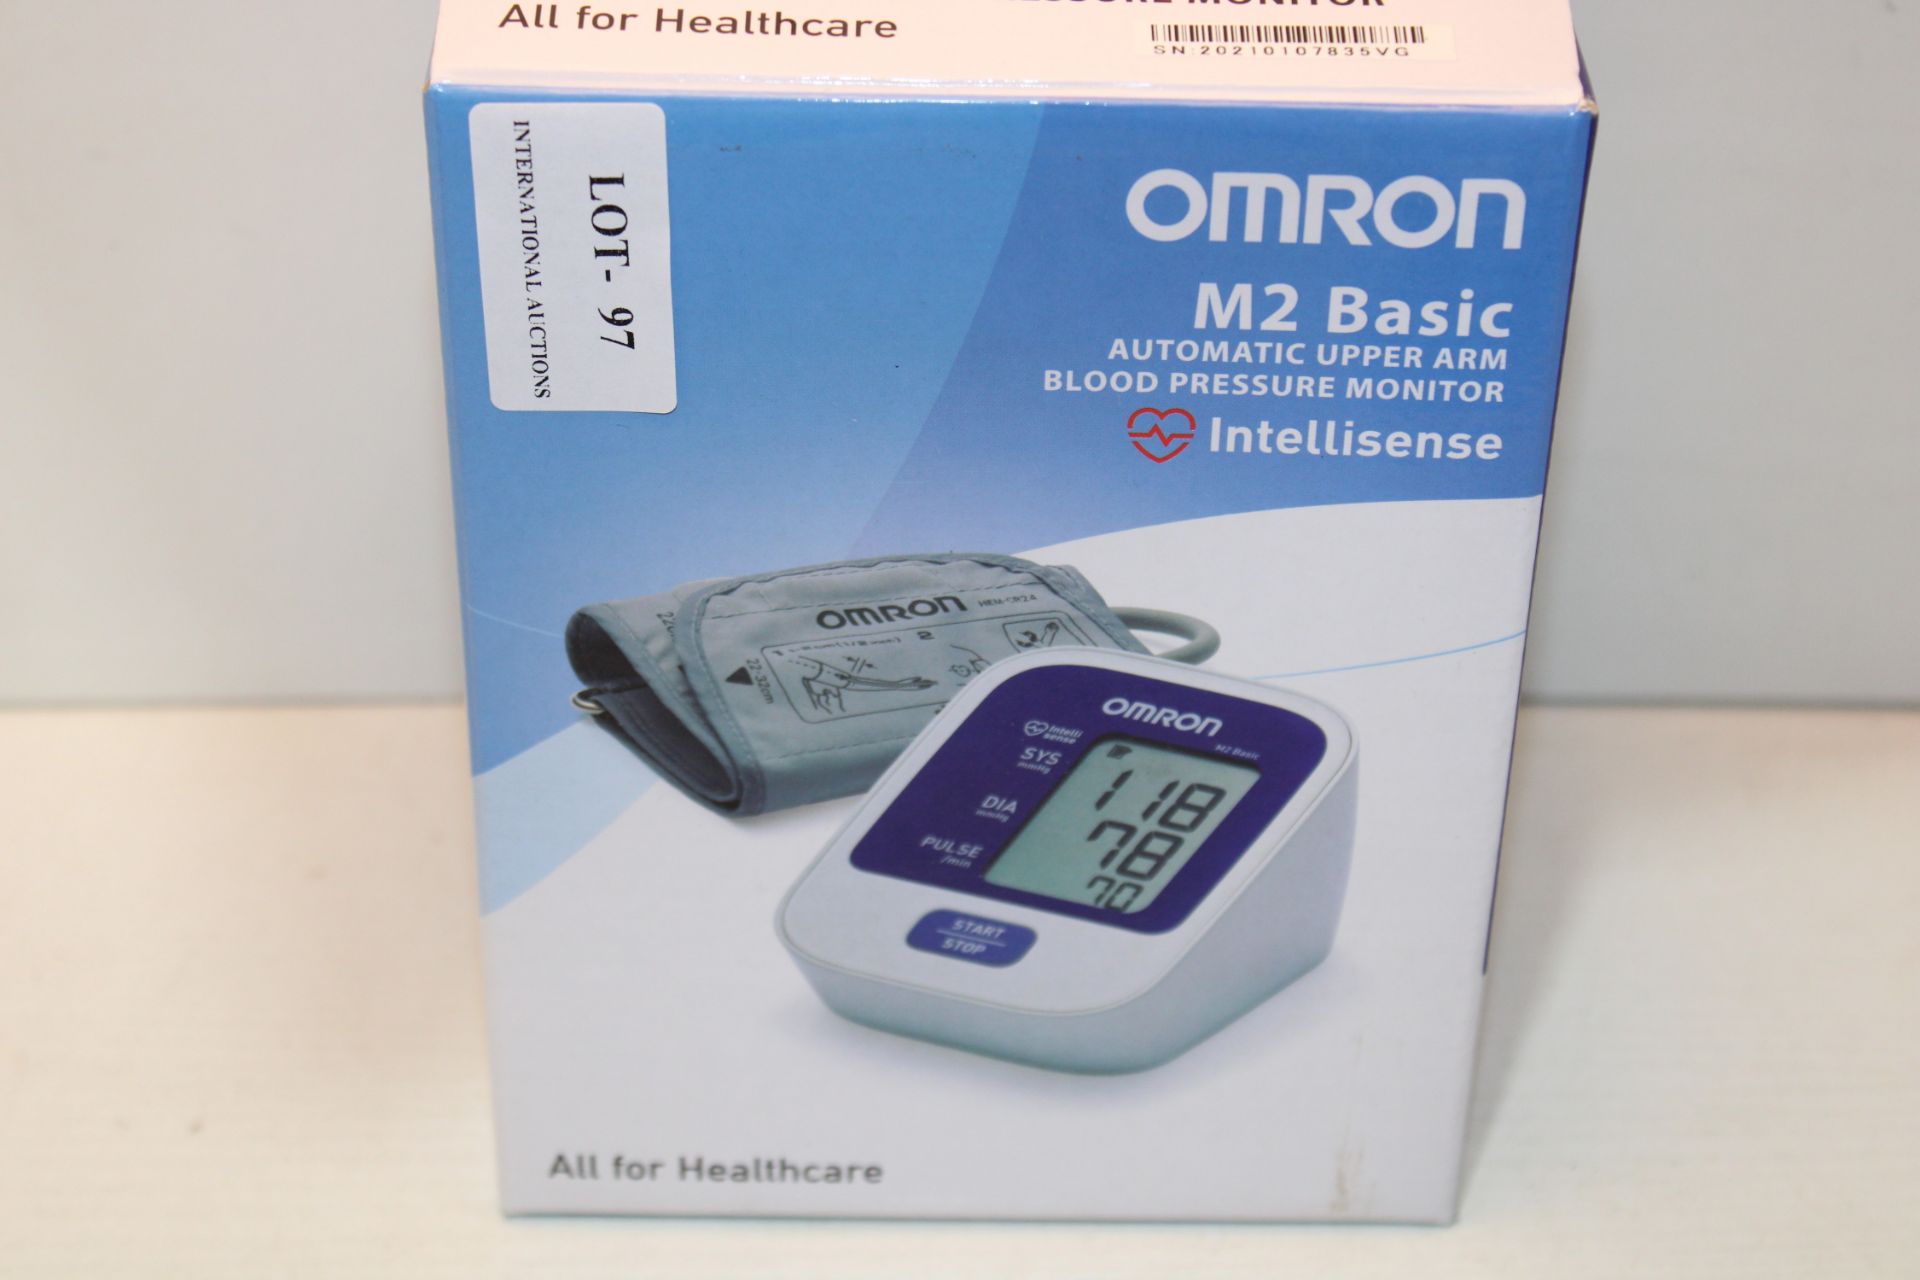 BOXED OMRON M2 BASIC AUTOMATIC UPPER ARM BLOOD PRESSURE MONITOR INTELLISENSE RRP £24.99Condition